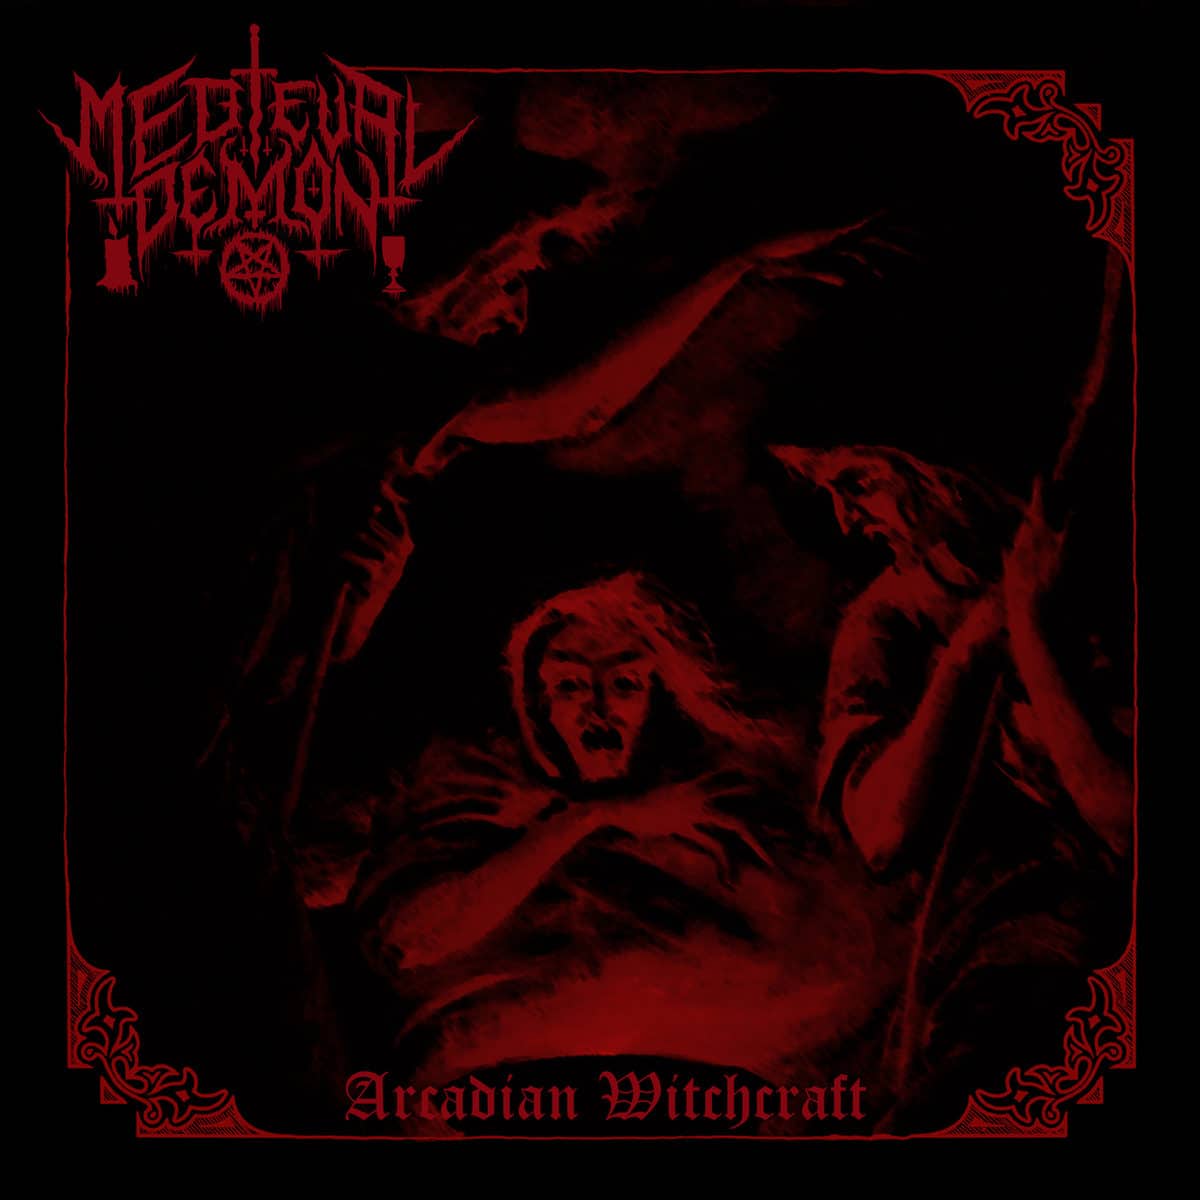 MEDIEVAL-DEMON-Arcadian-Witchcraft-Cover.jpg